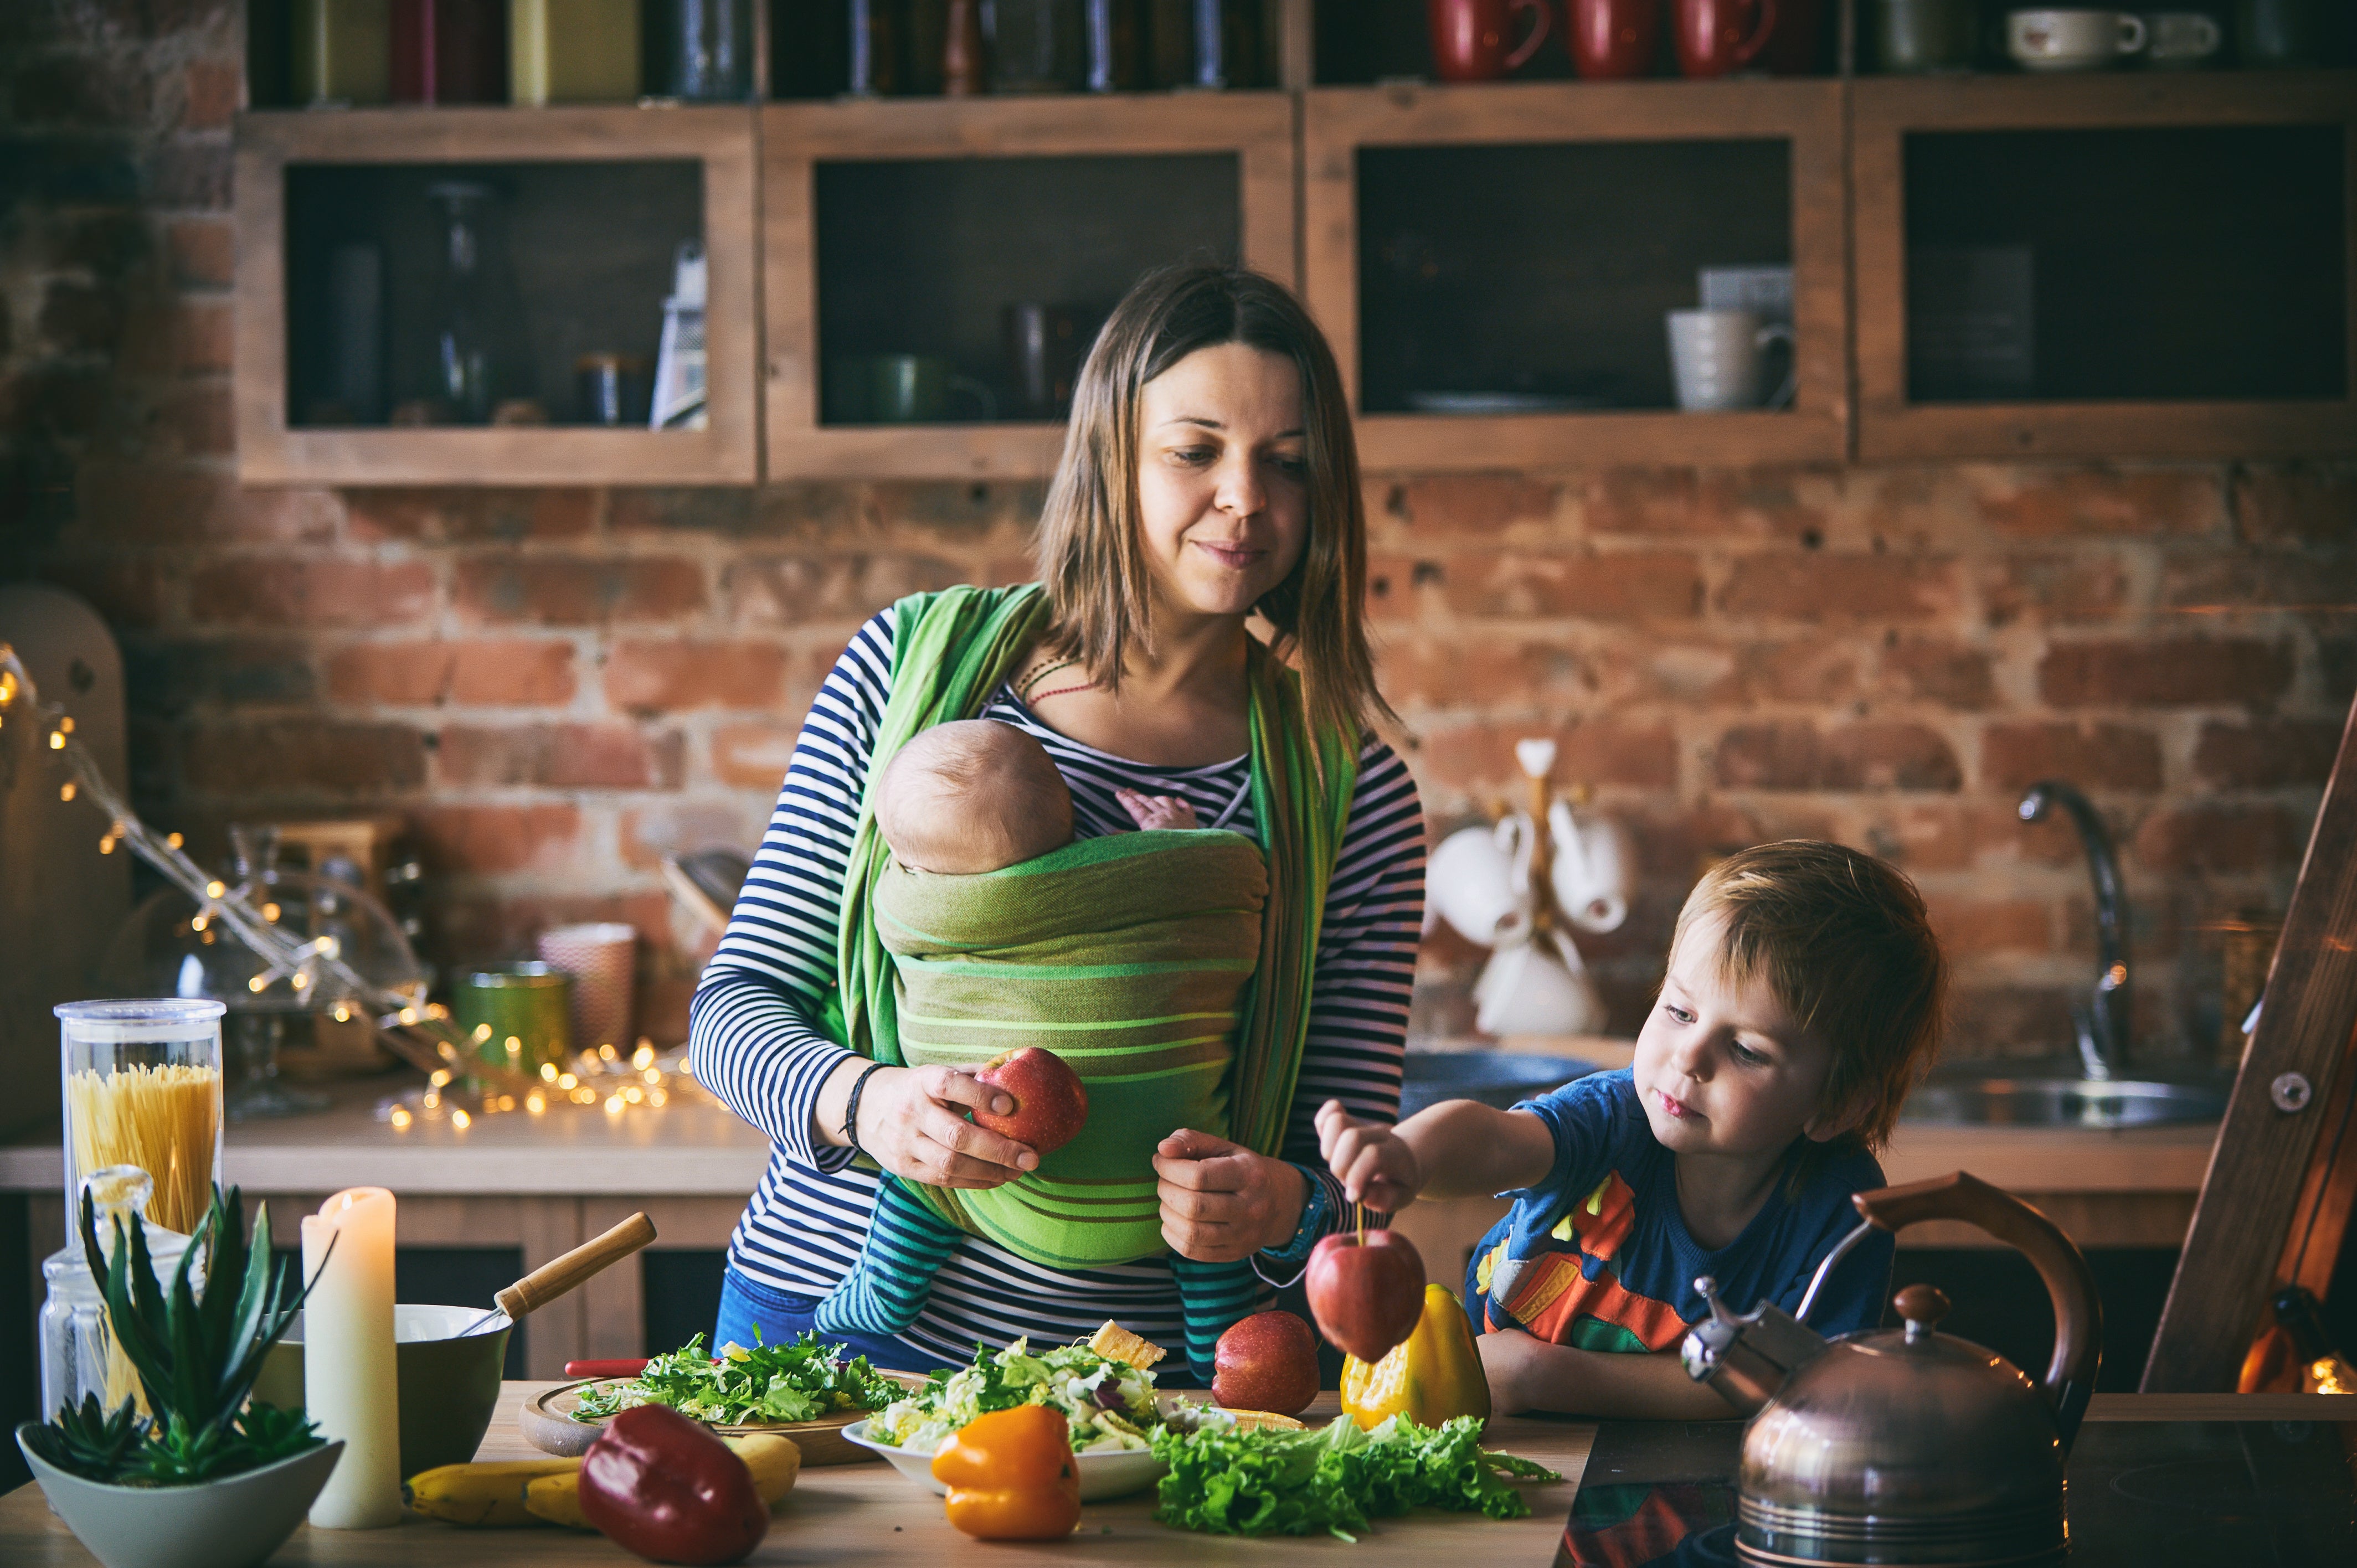 Mom baby-wearing an infant while cooking a healthy meal with toddler.